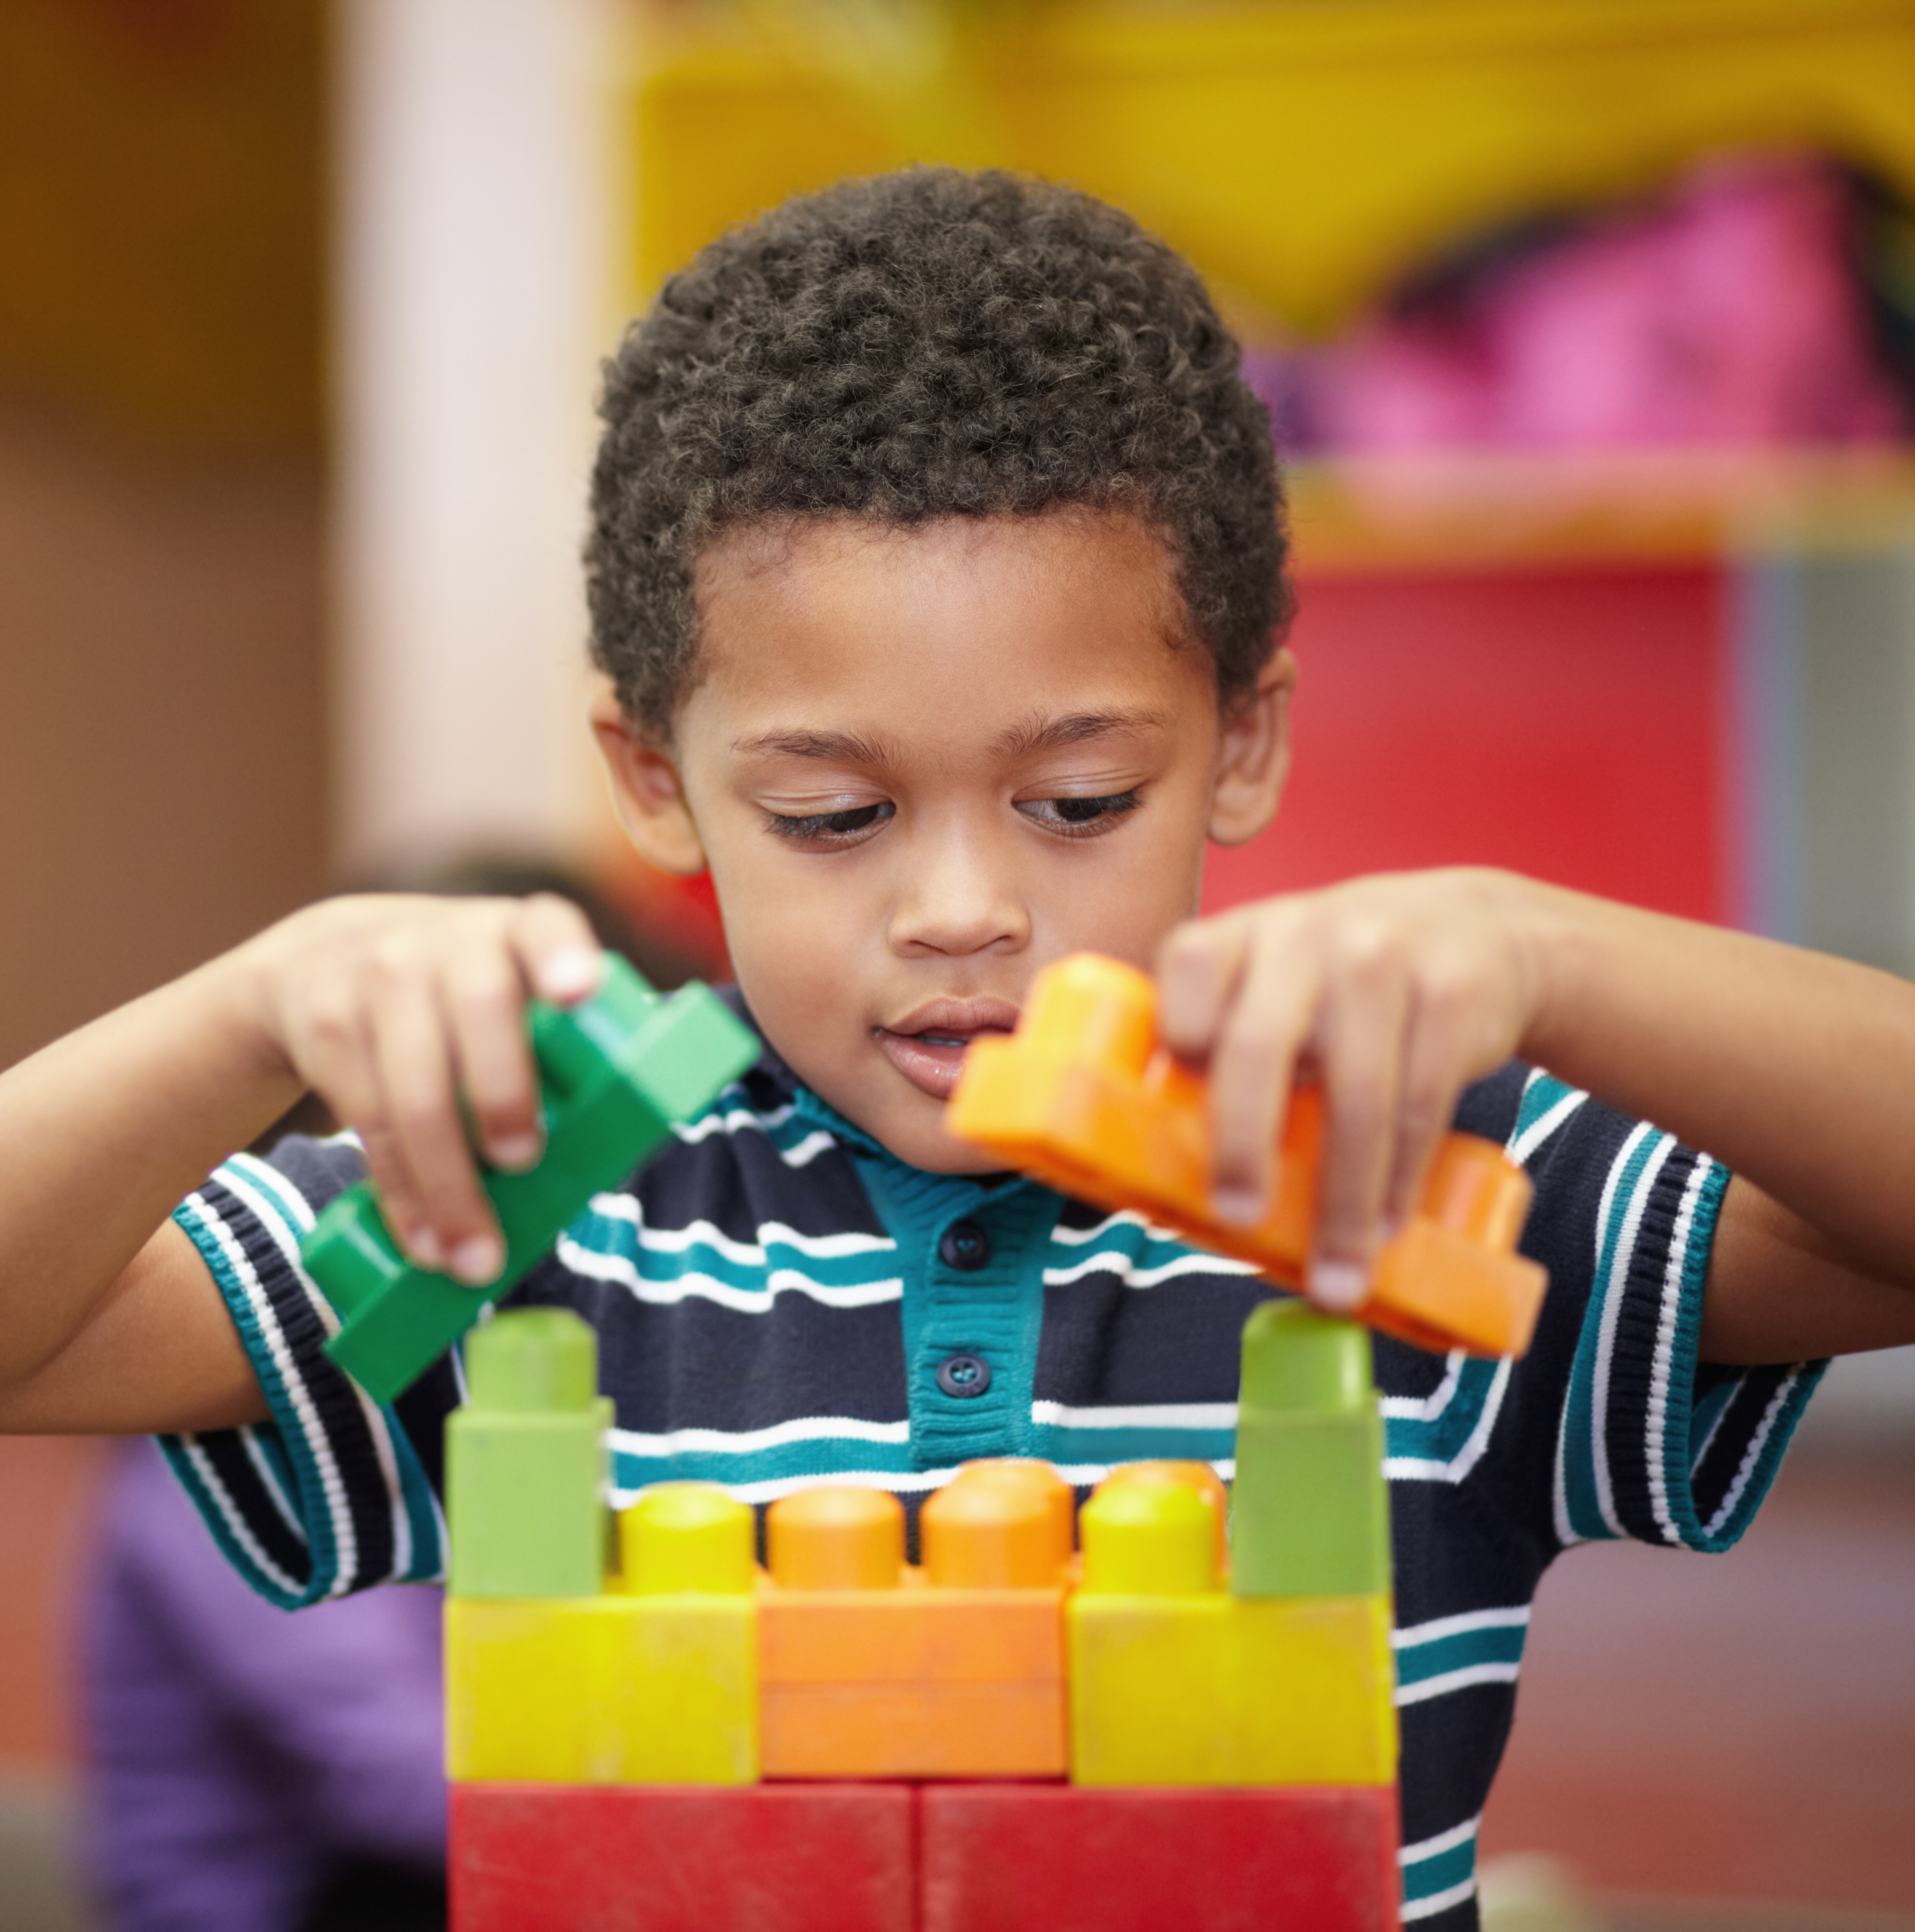 An interested pre-school child building something with plastic blocks